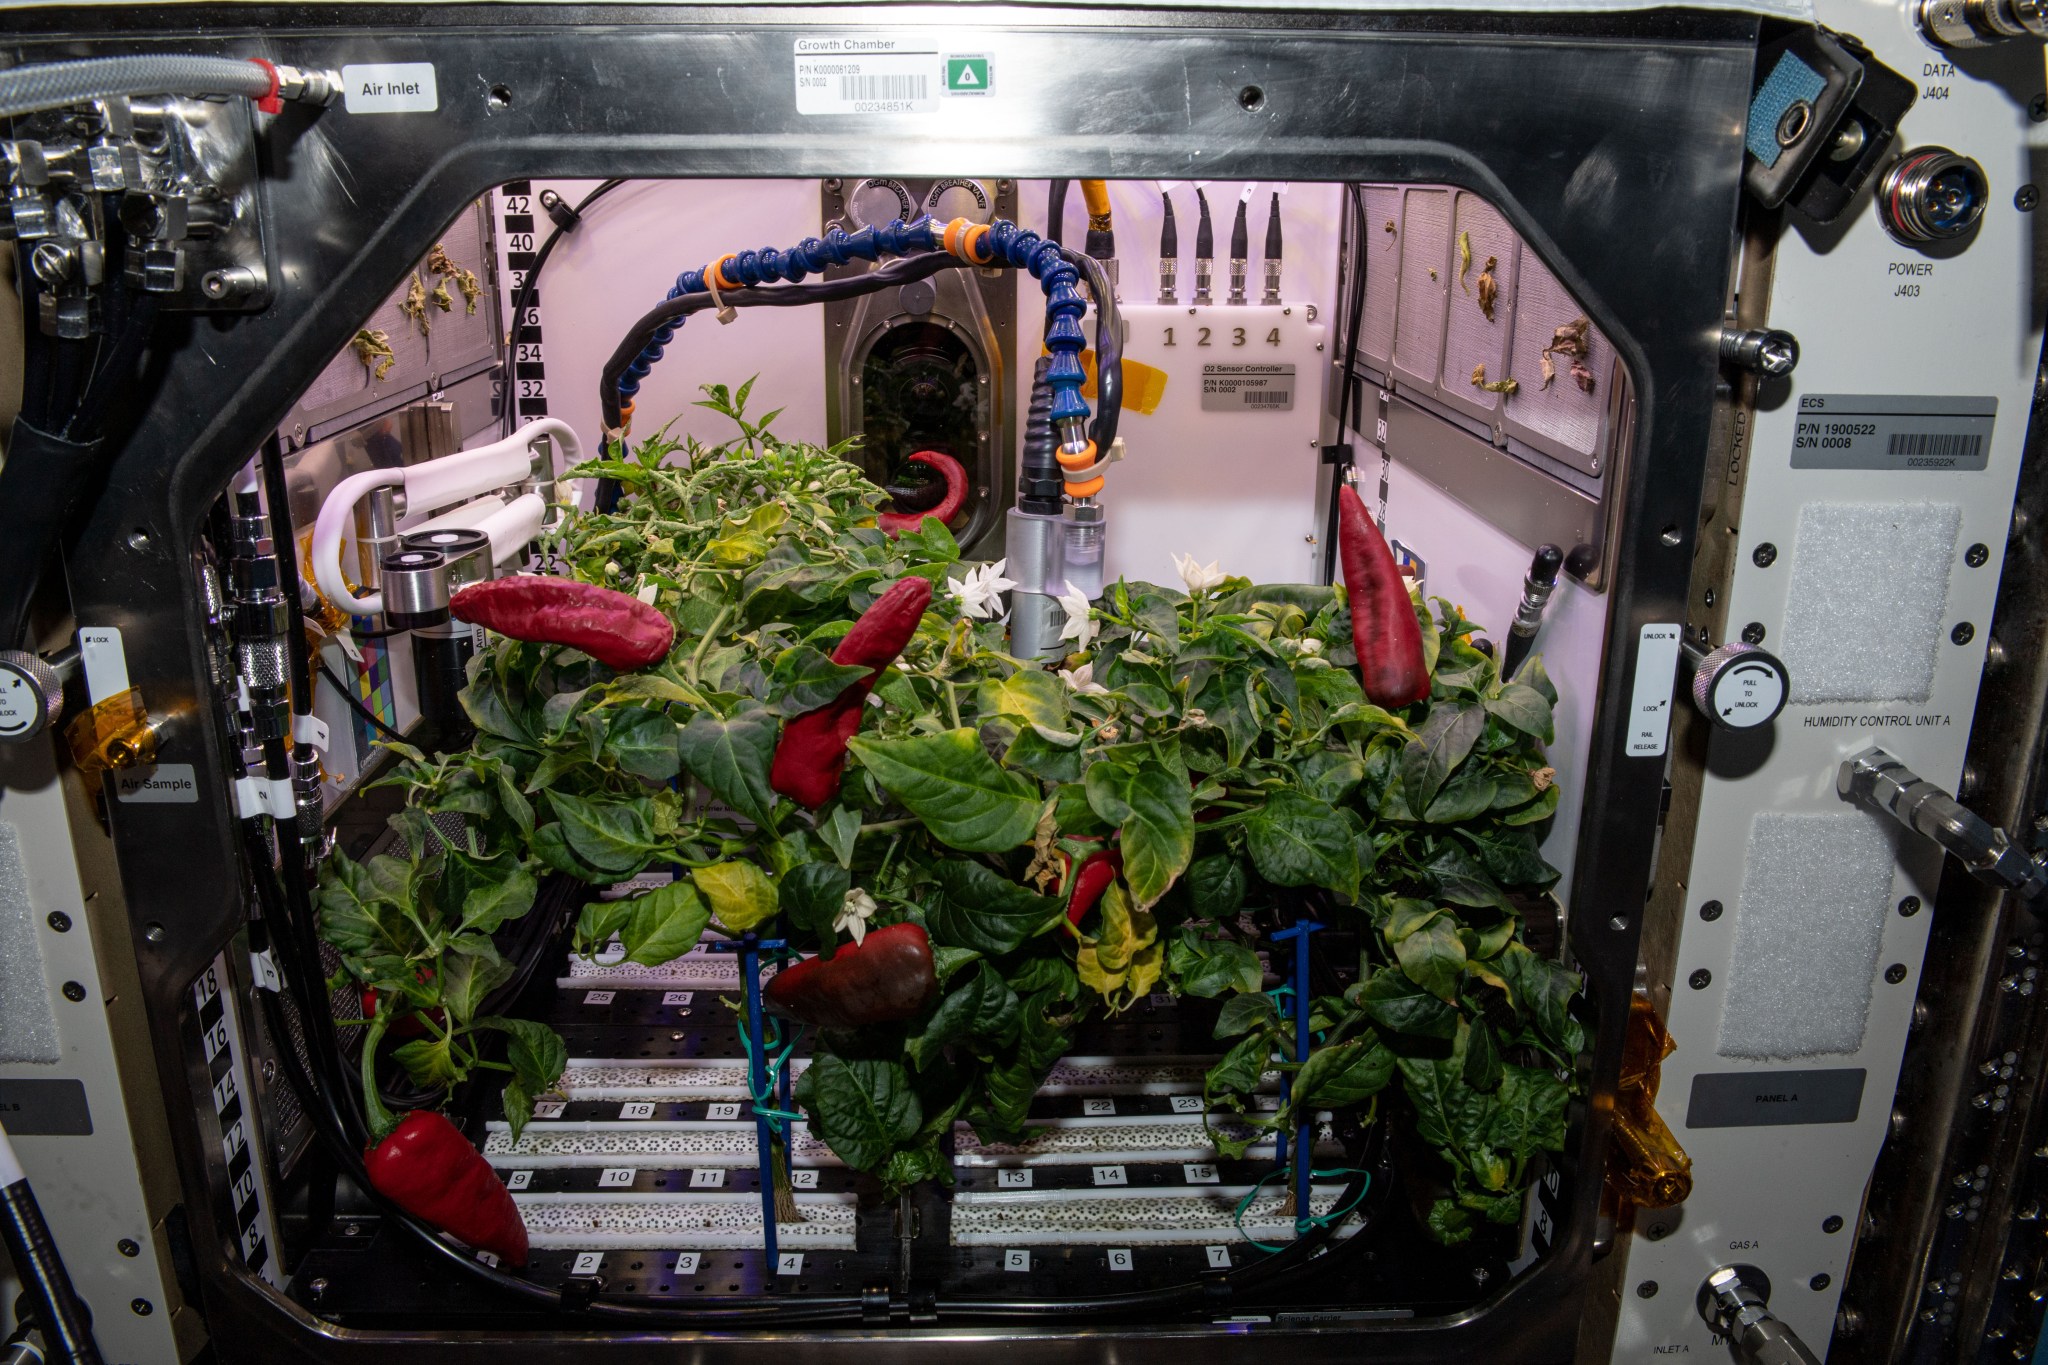 Peppers harvested from the Plant Habitat-04 experiment are set aside for the astronauts to eat. Twelve other peppers harvested from the experiment will return to Earth for analysis.